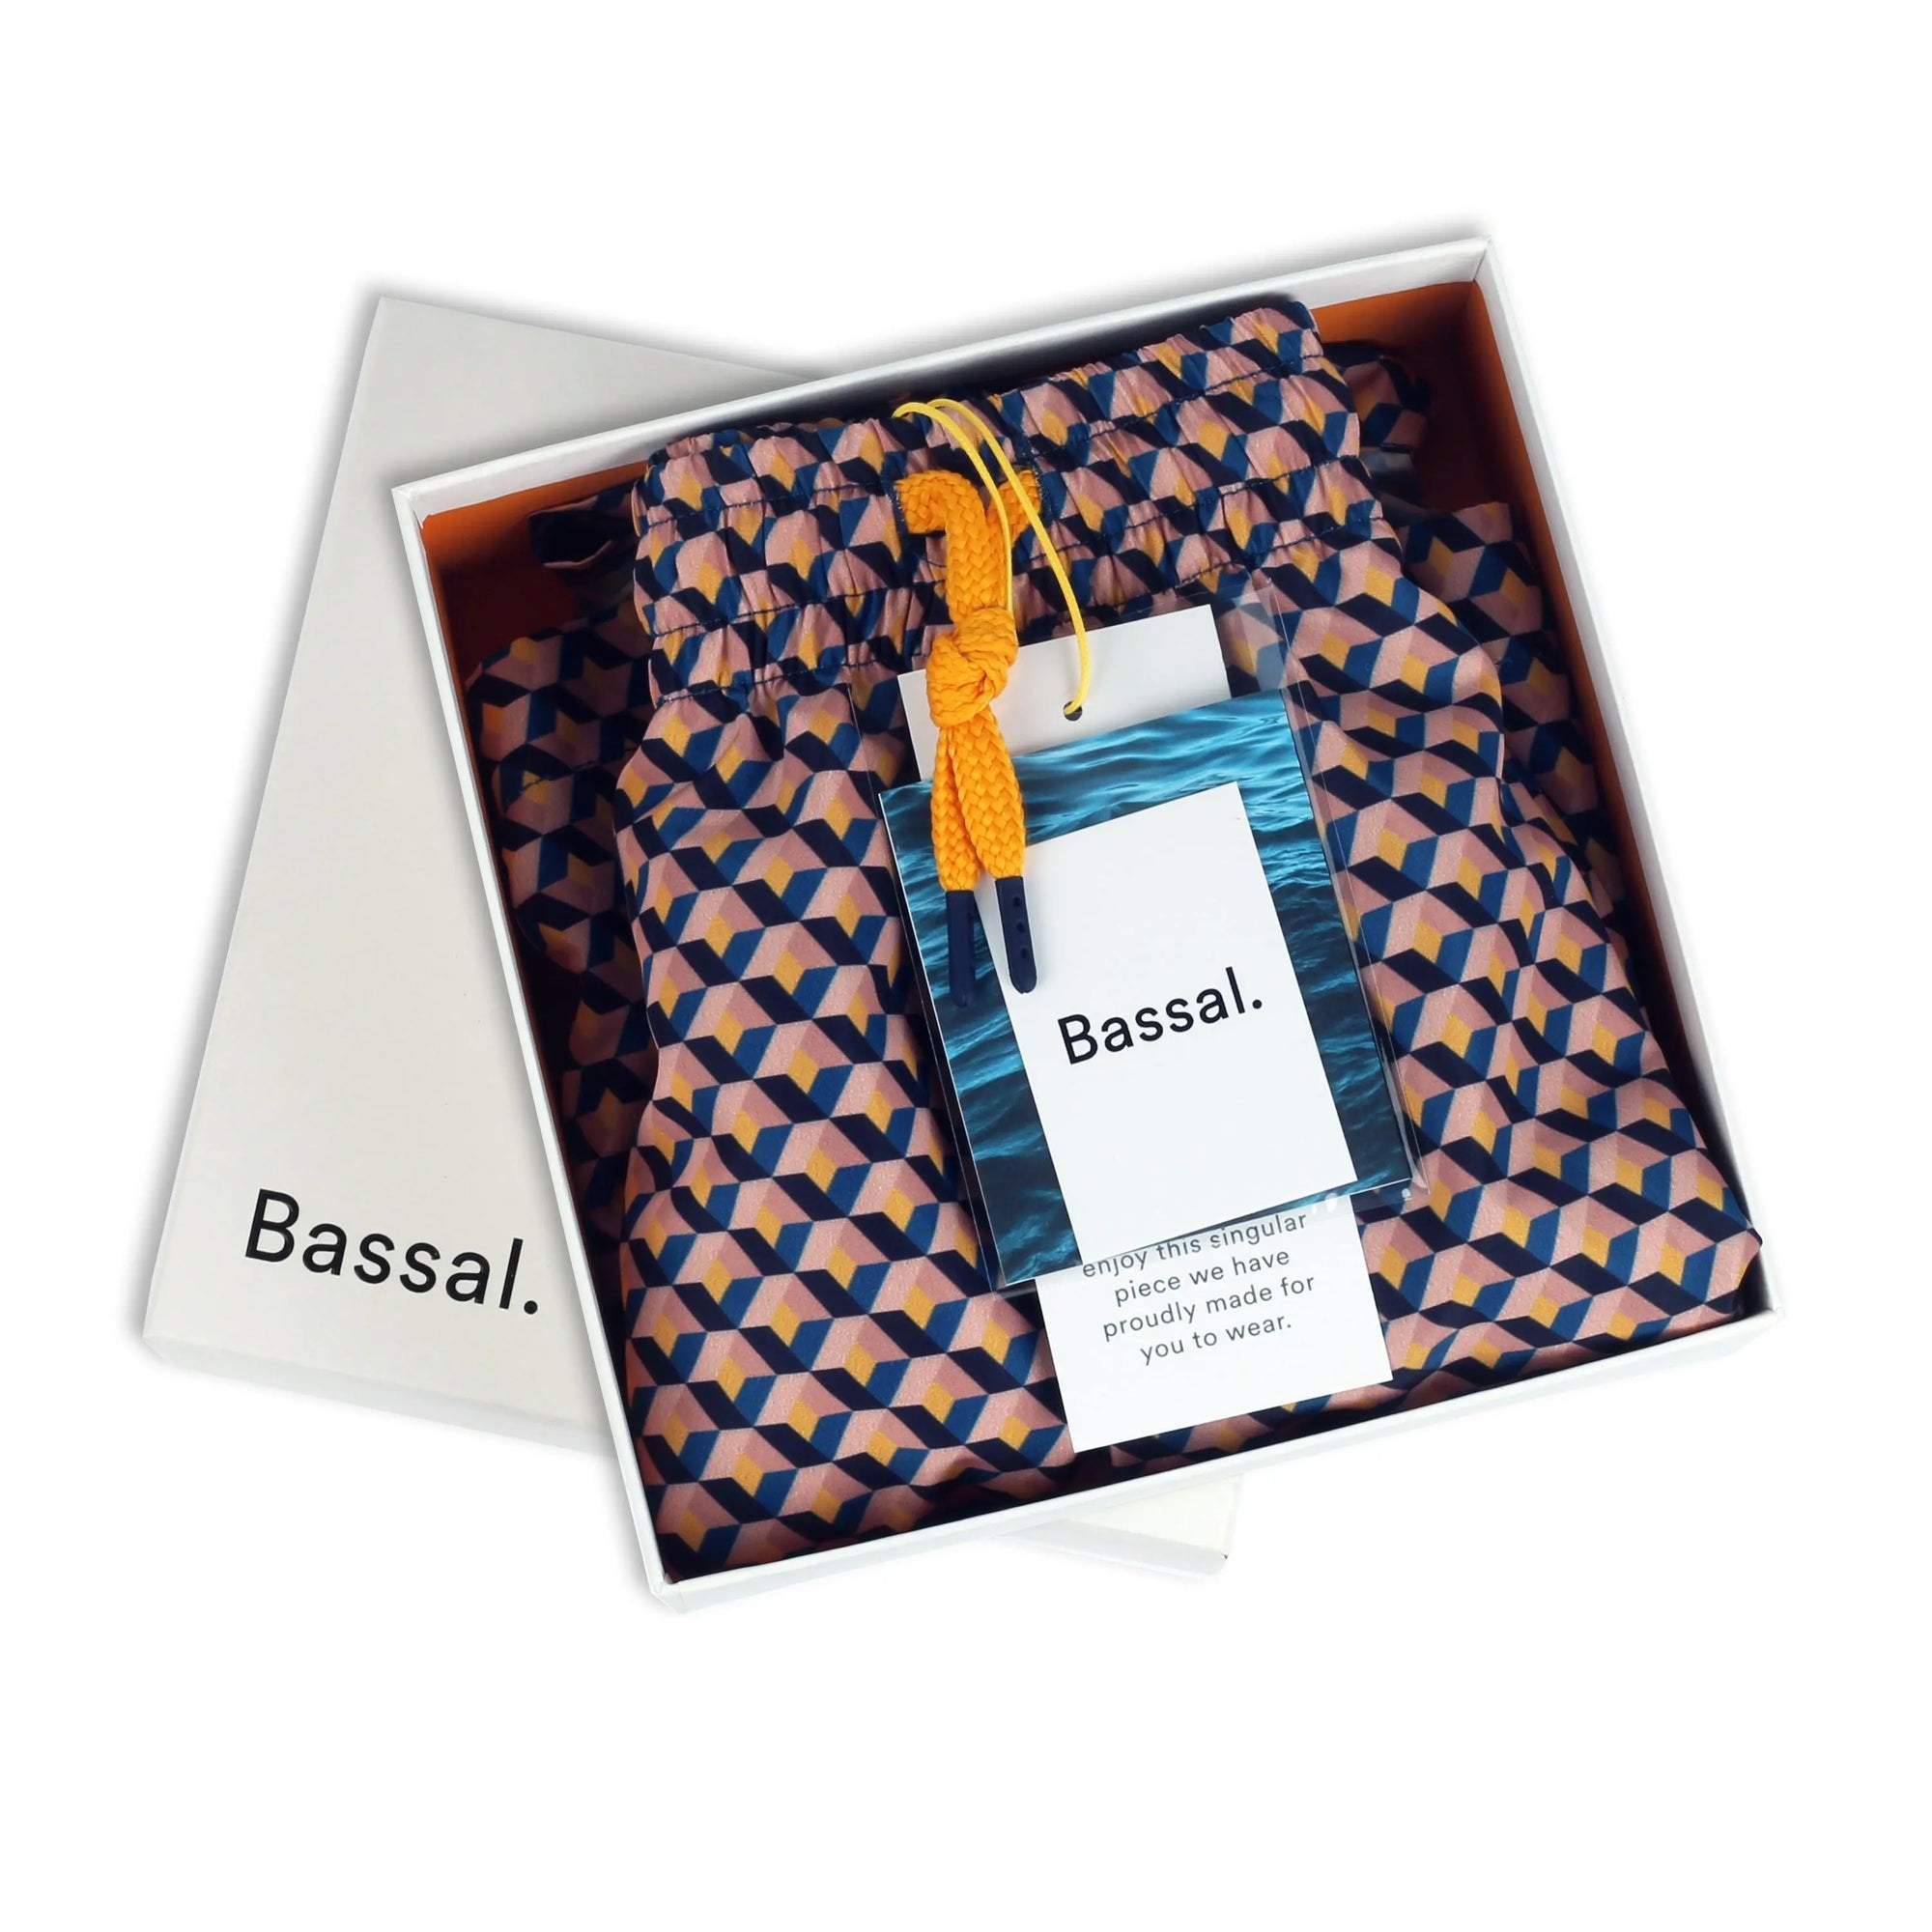 Open white box from Bassalstore with "Bassal." written on the lid, containing a folded pair of Vee Swimwear in orange, blue, and white. The swimwear has a tag attached, and the lid has another tag with a message inside. A stylish piece straight from Barcelona.